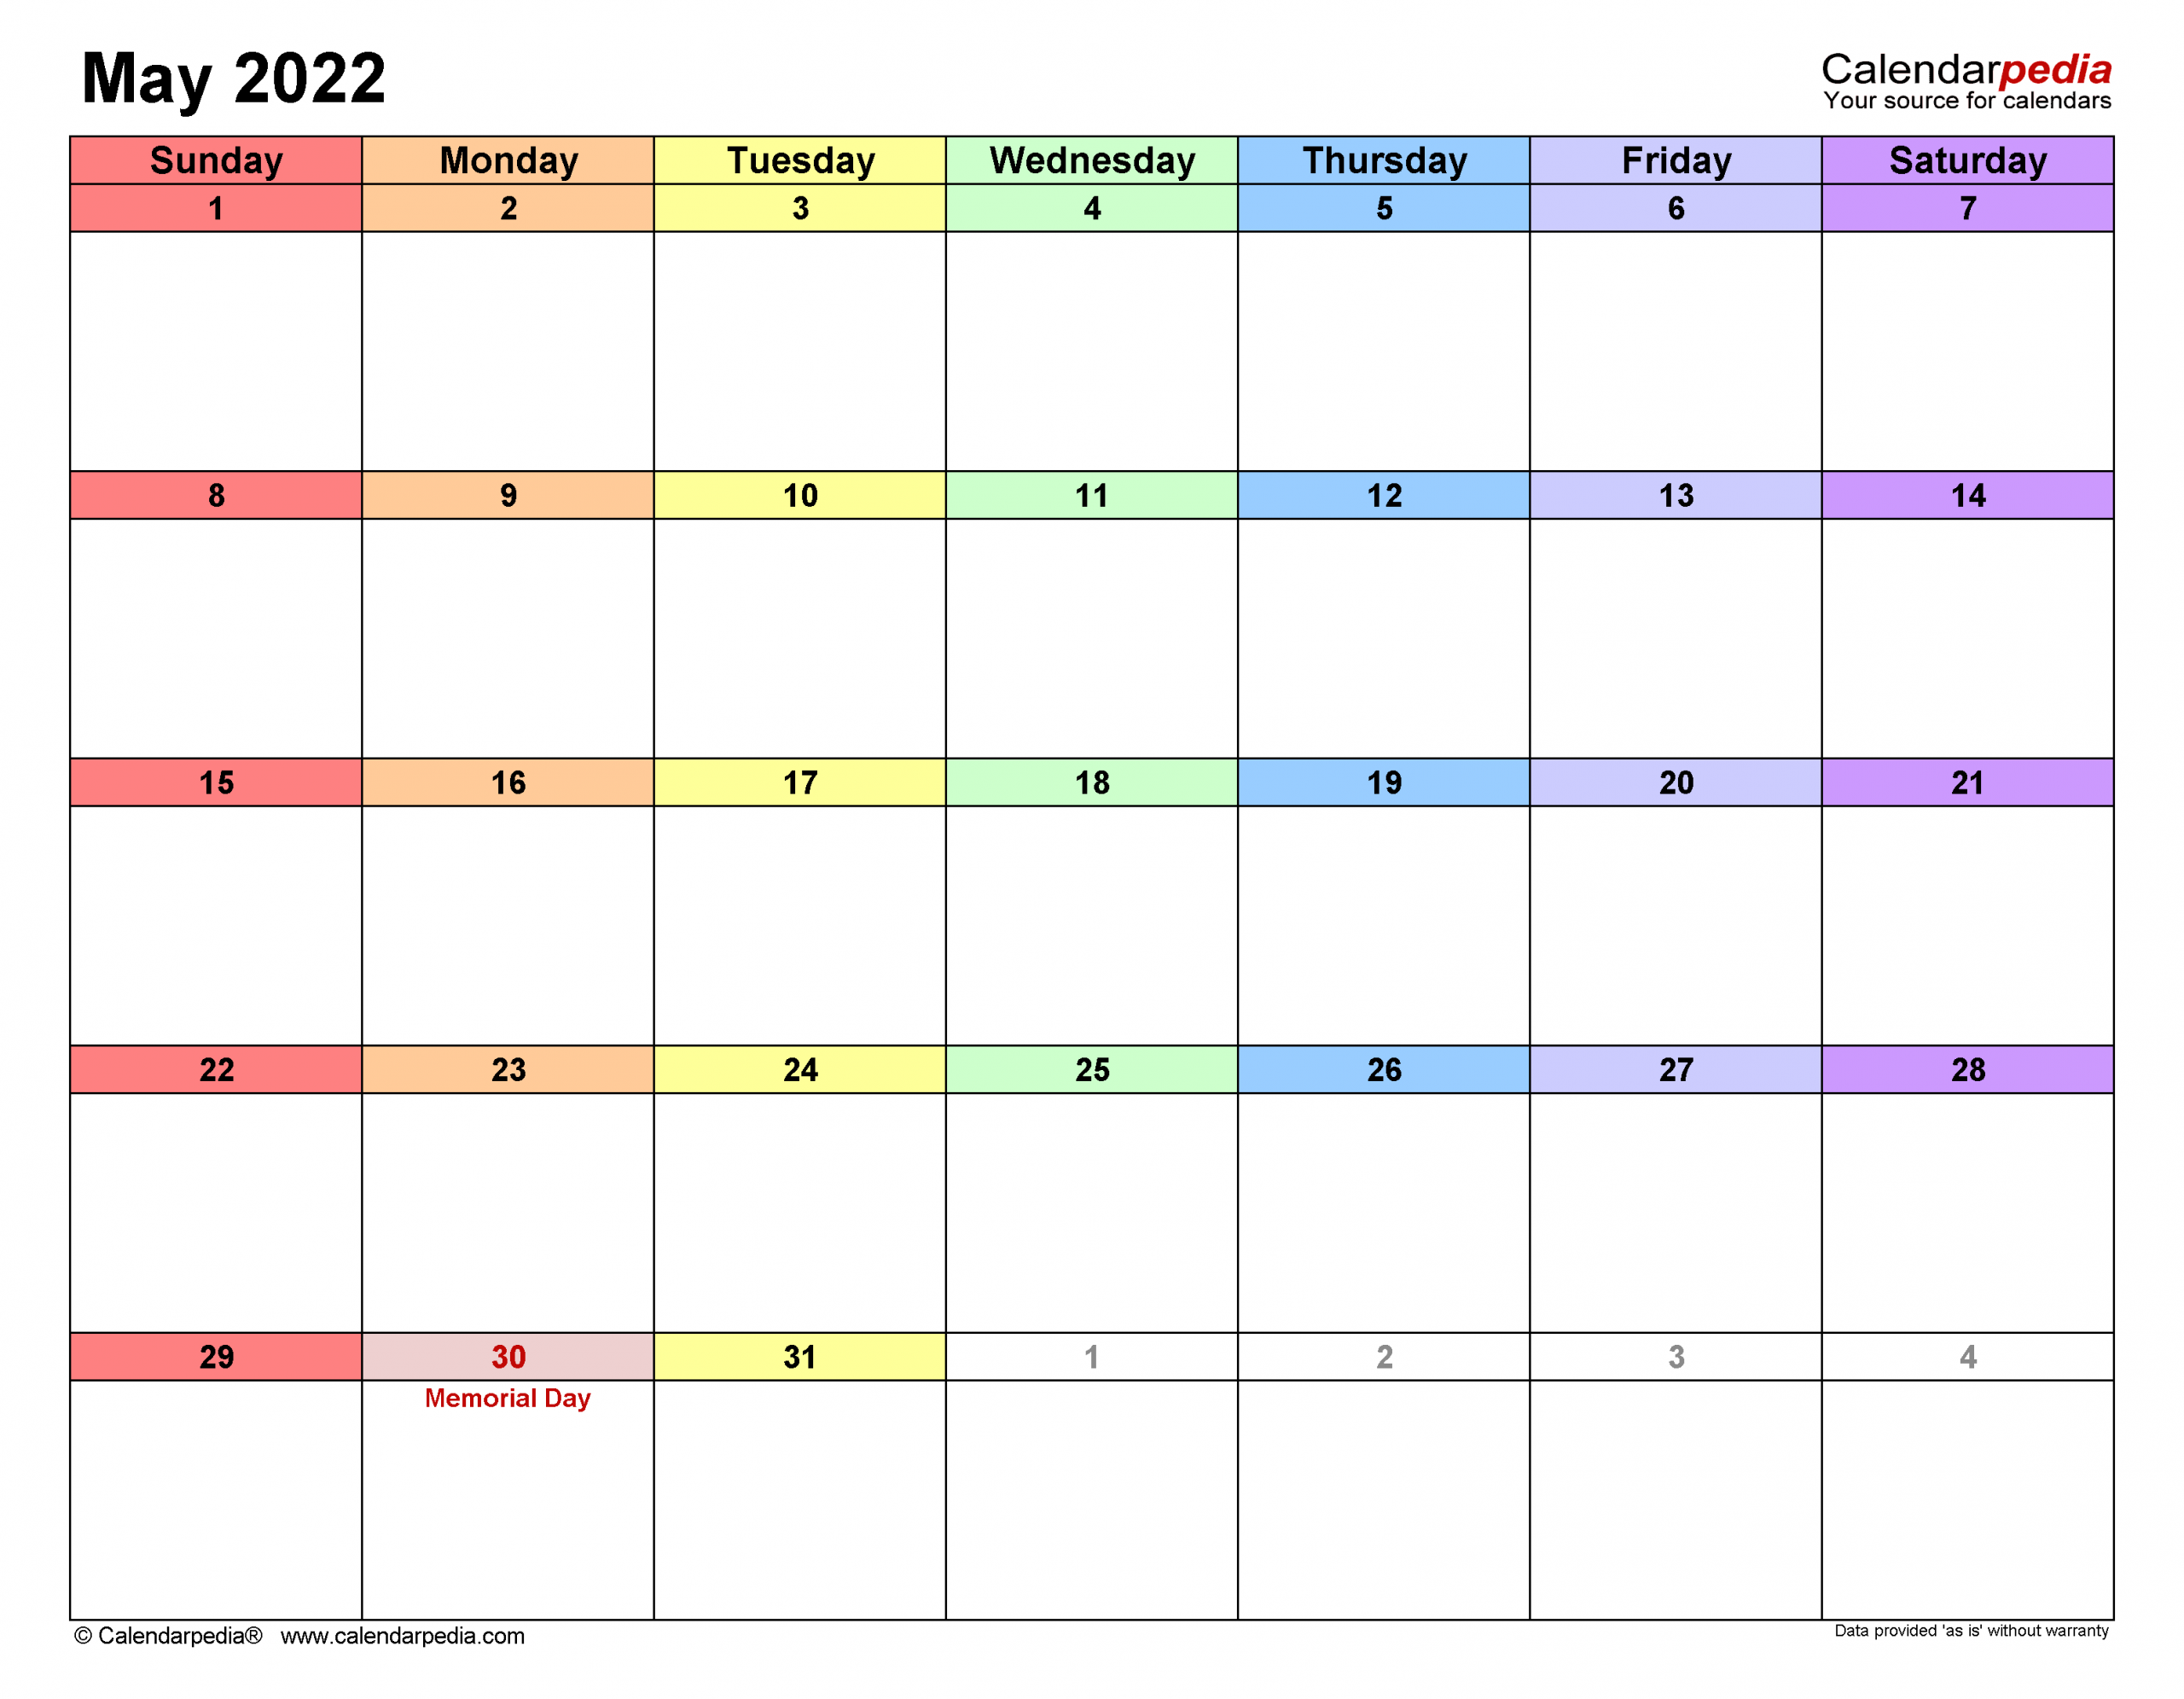 May 2022 Calendar | Templates For Word, Excel And Pdf